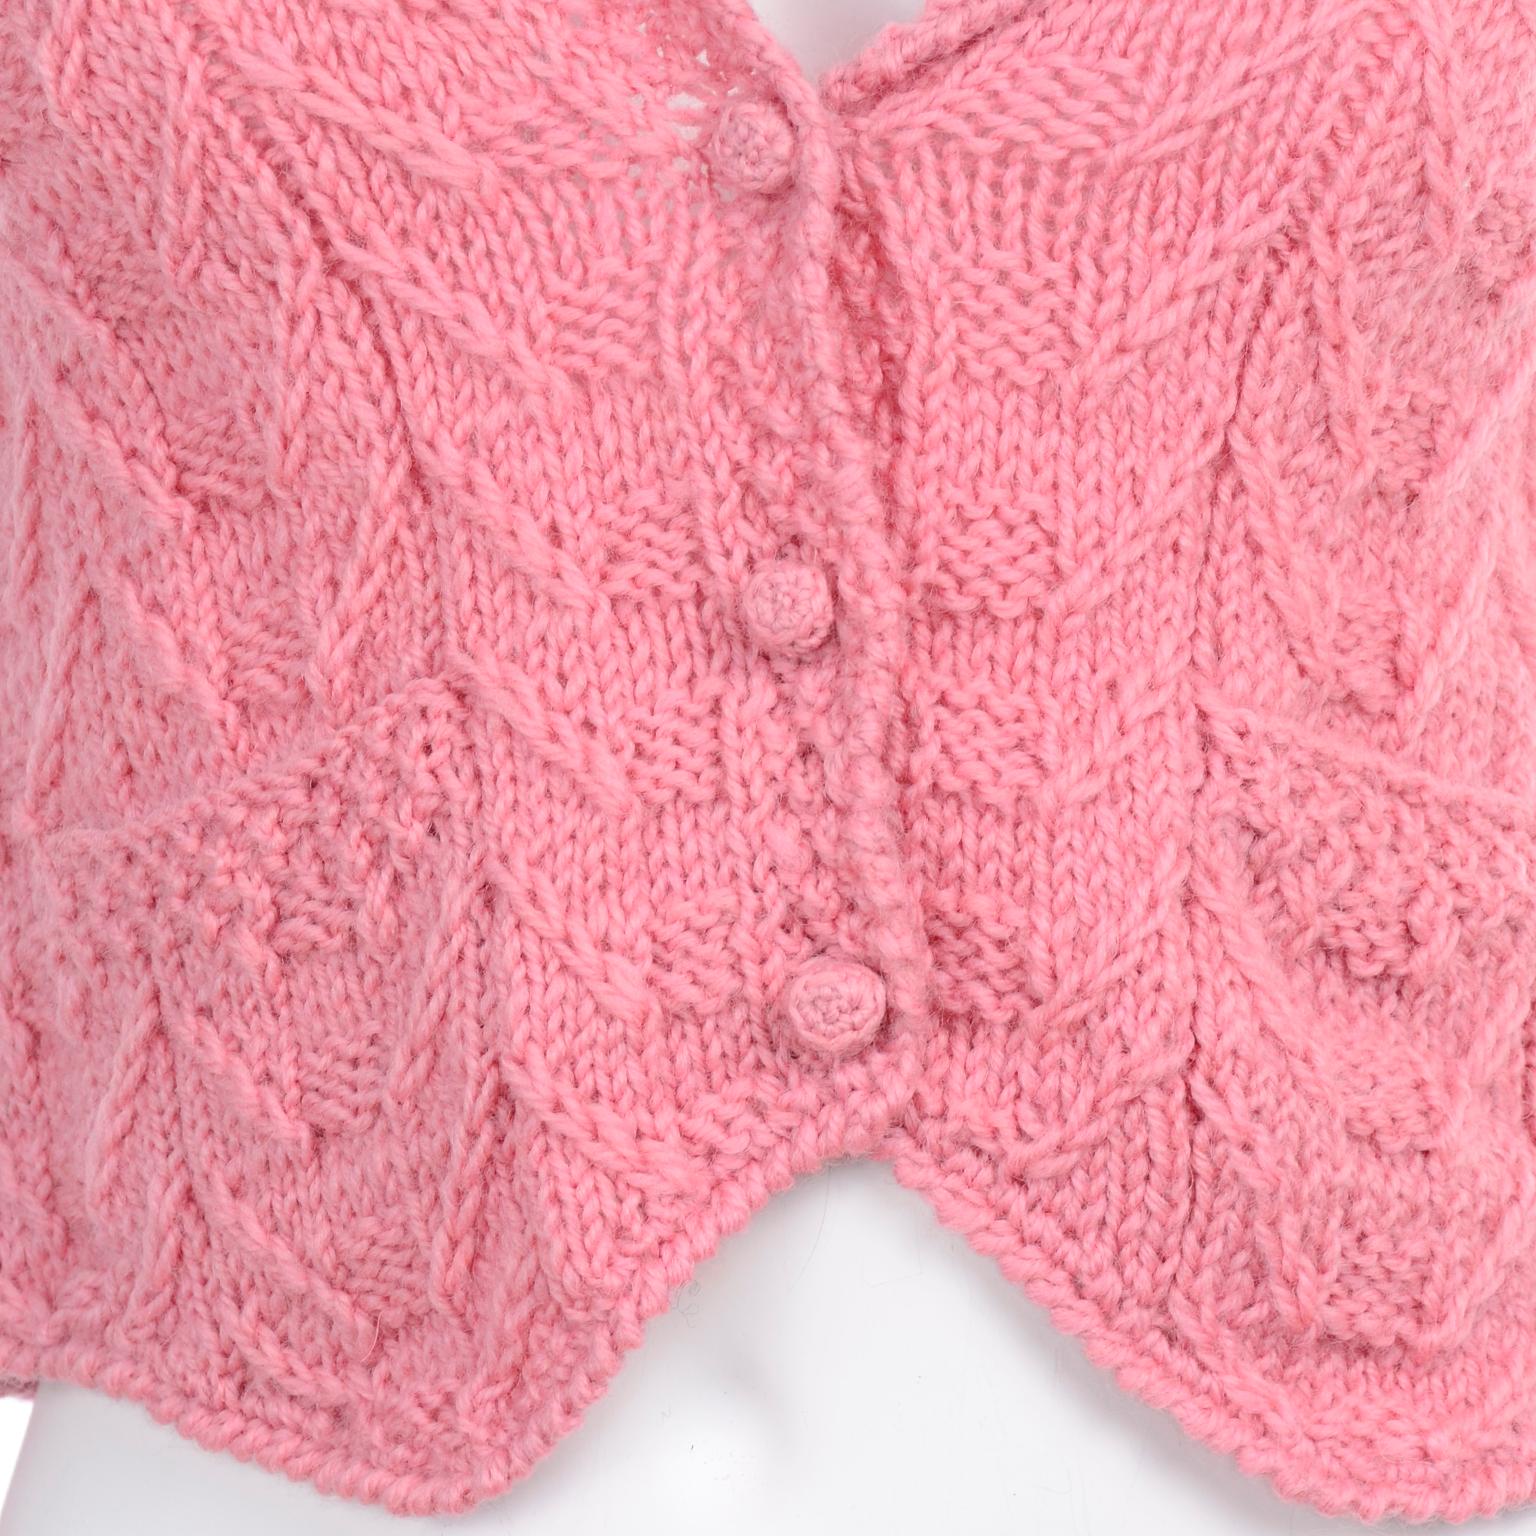 Ralph Lauren Vintage Pink Wool Cardigan Knit Sweater Made in Italy 2